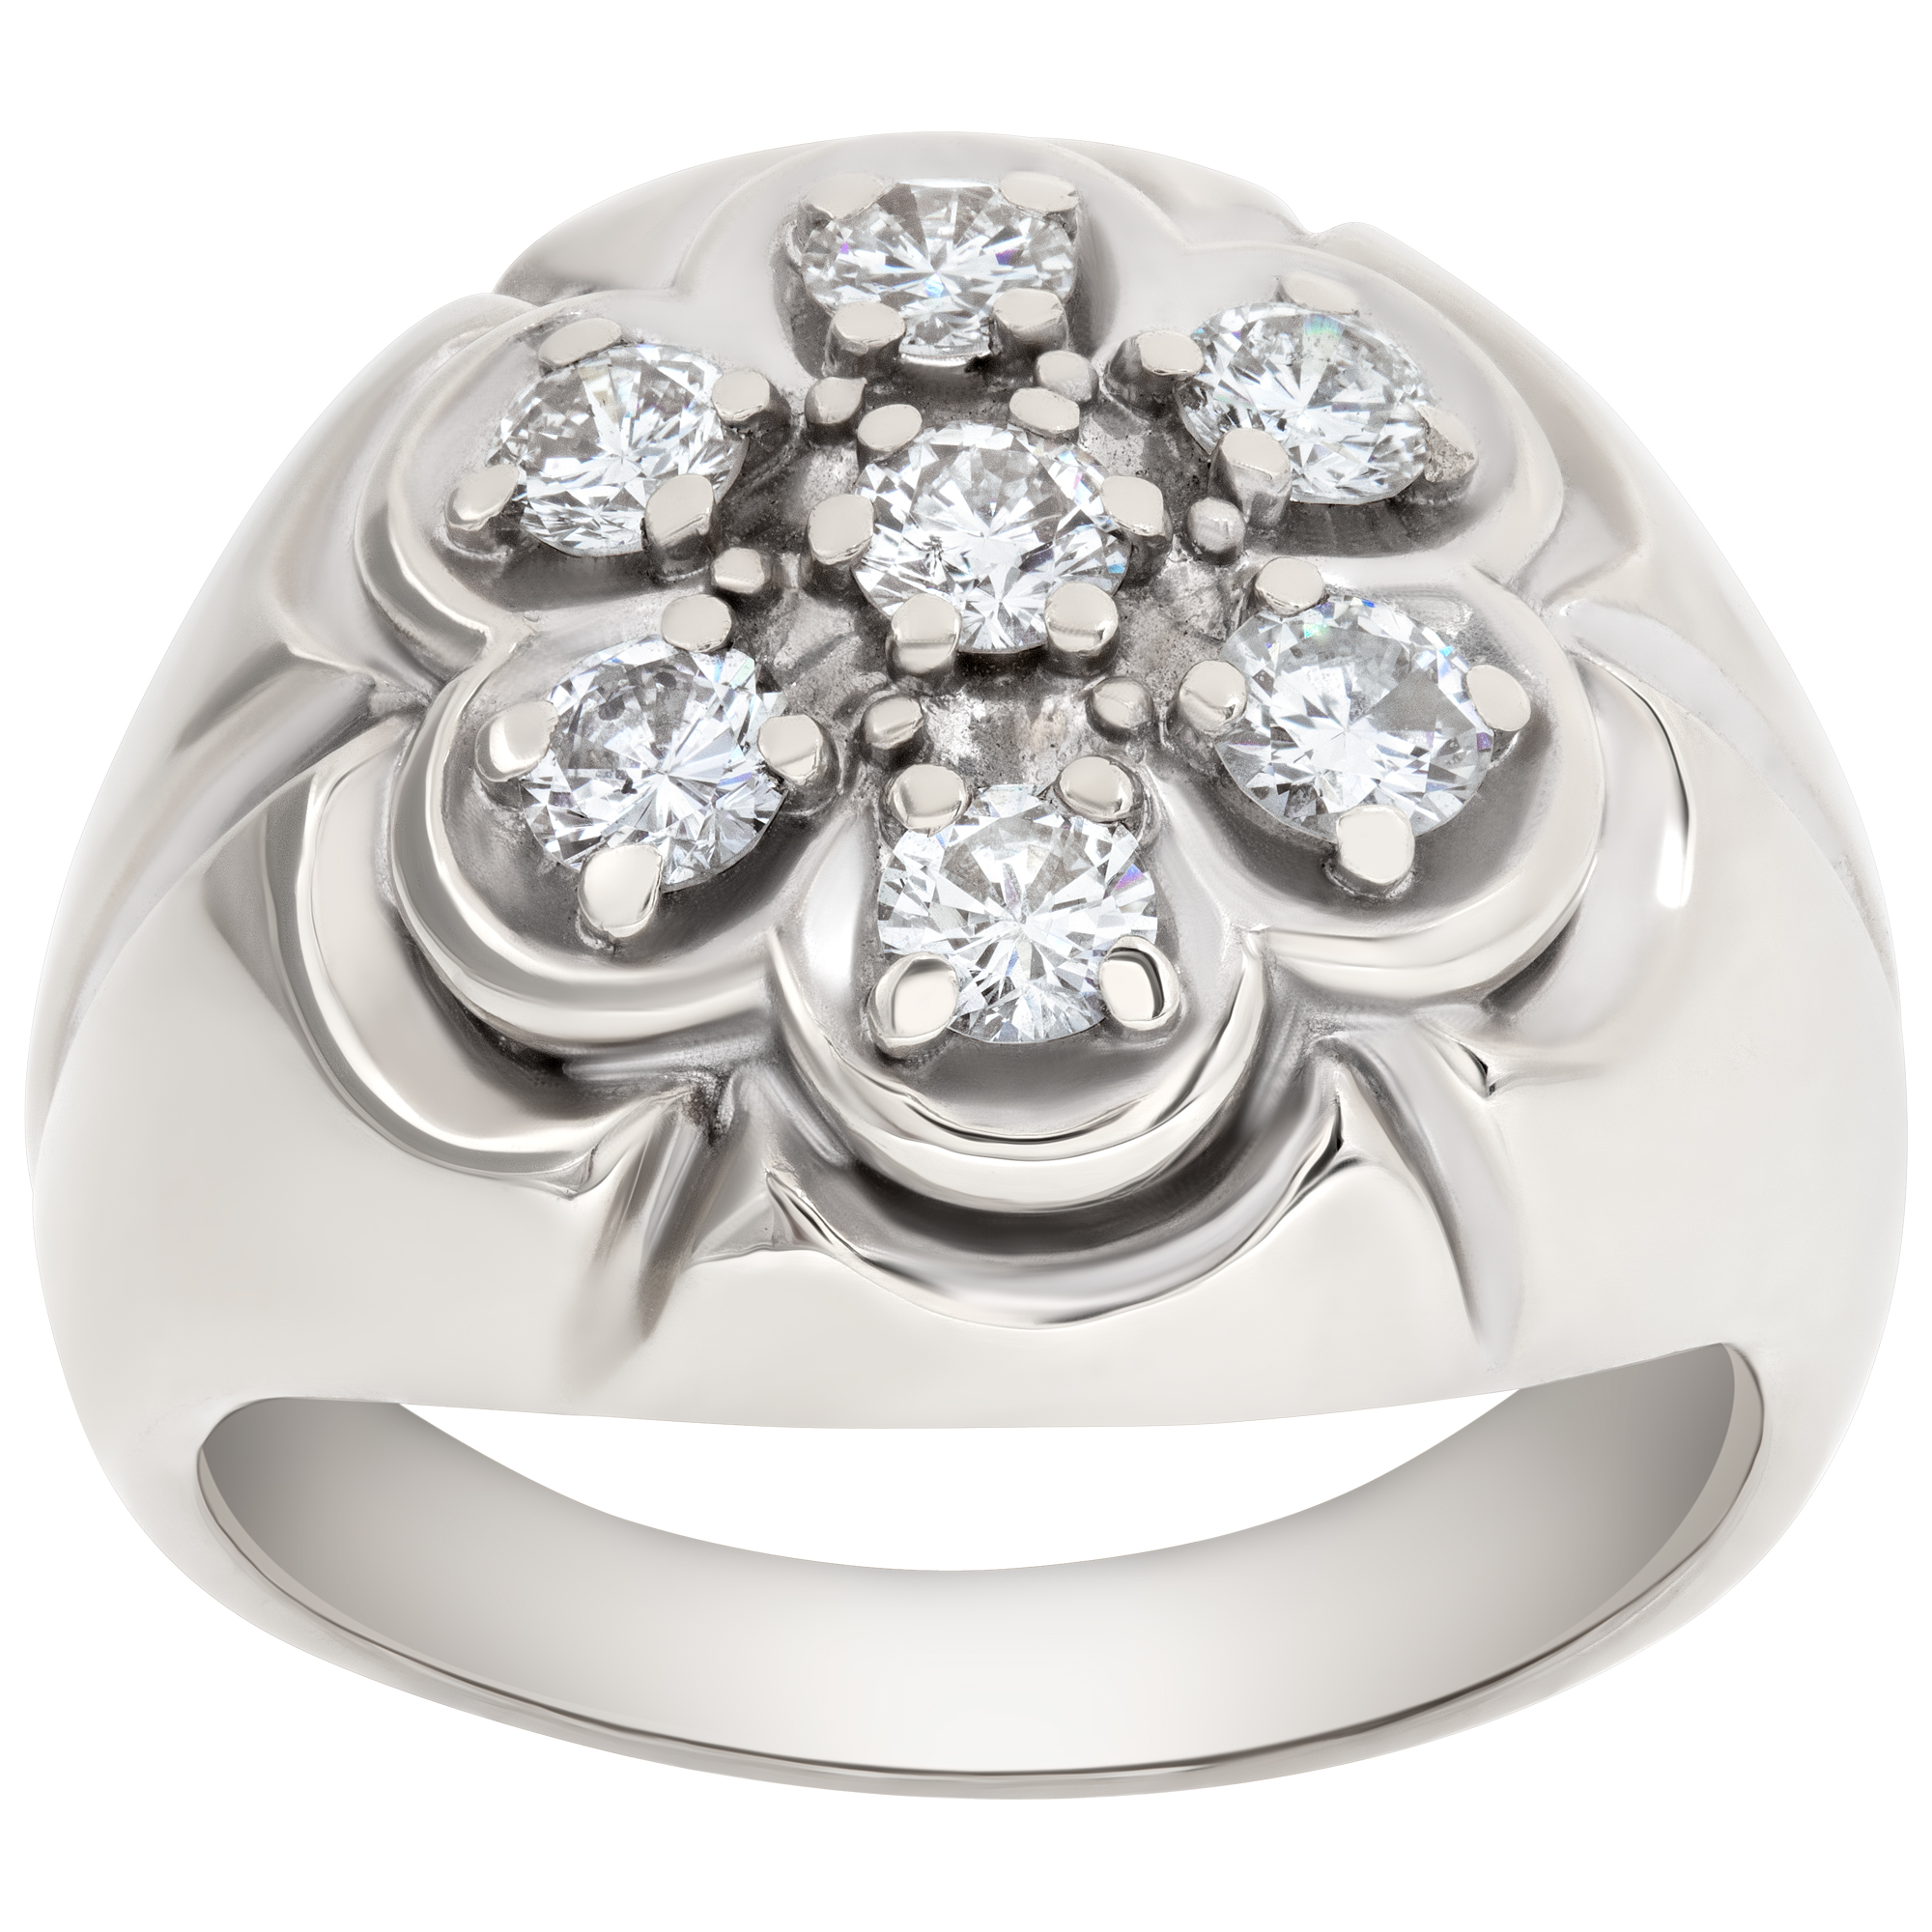 Cluster diamond ring in 14k white gold with approximately 1.00 carat round brilliant cut diamonds image 1